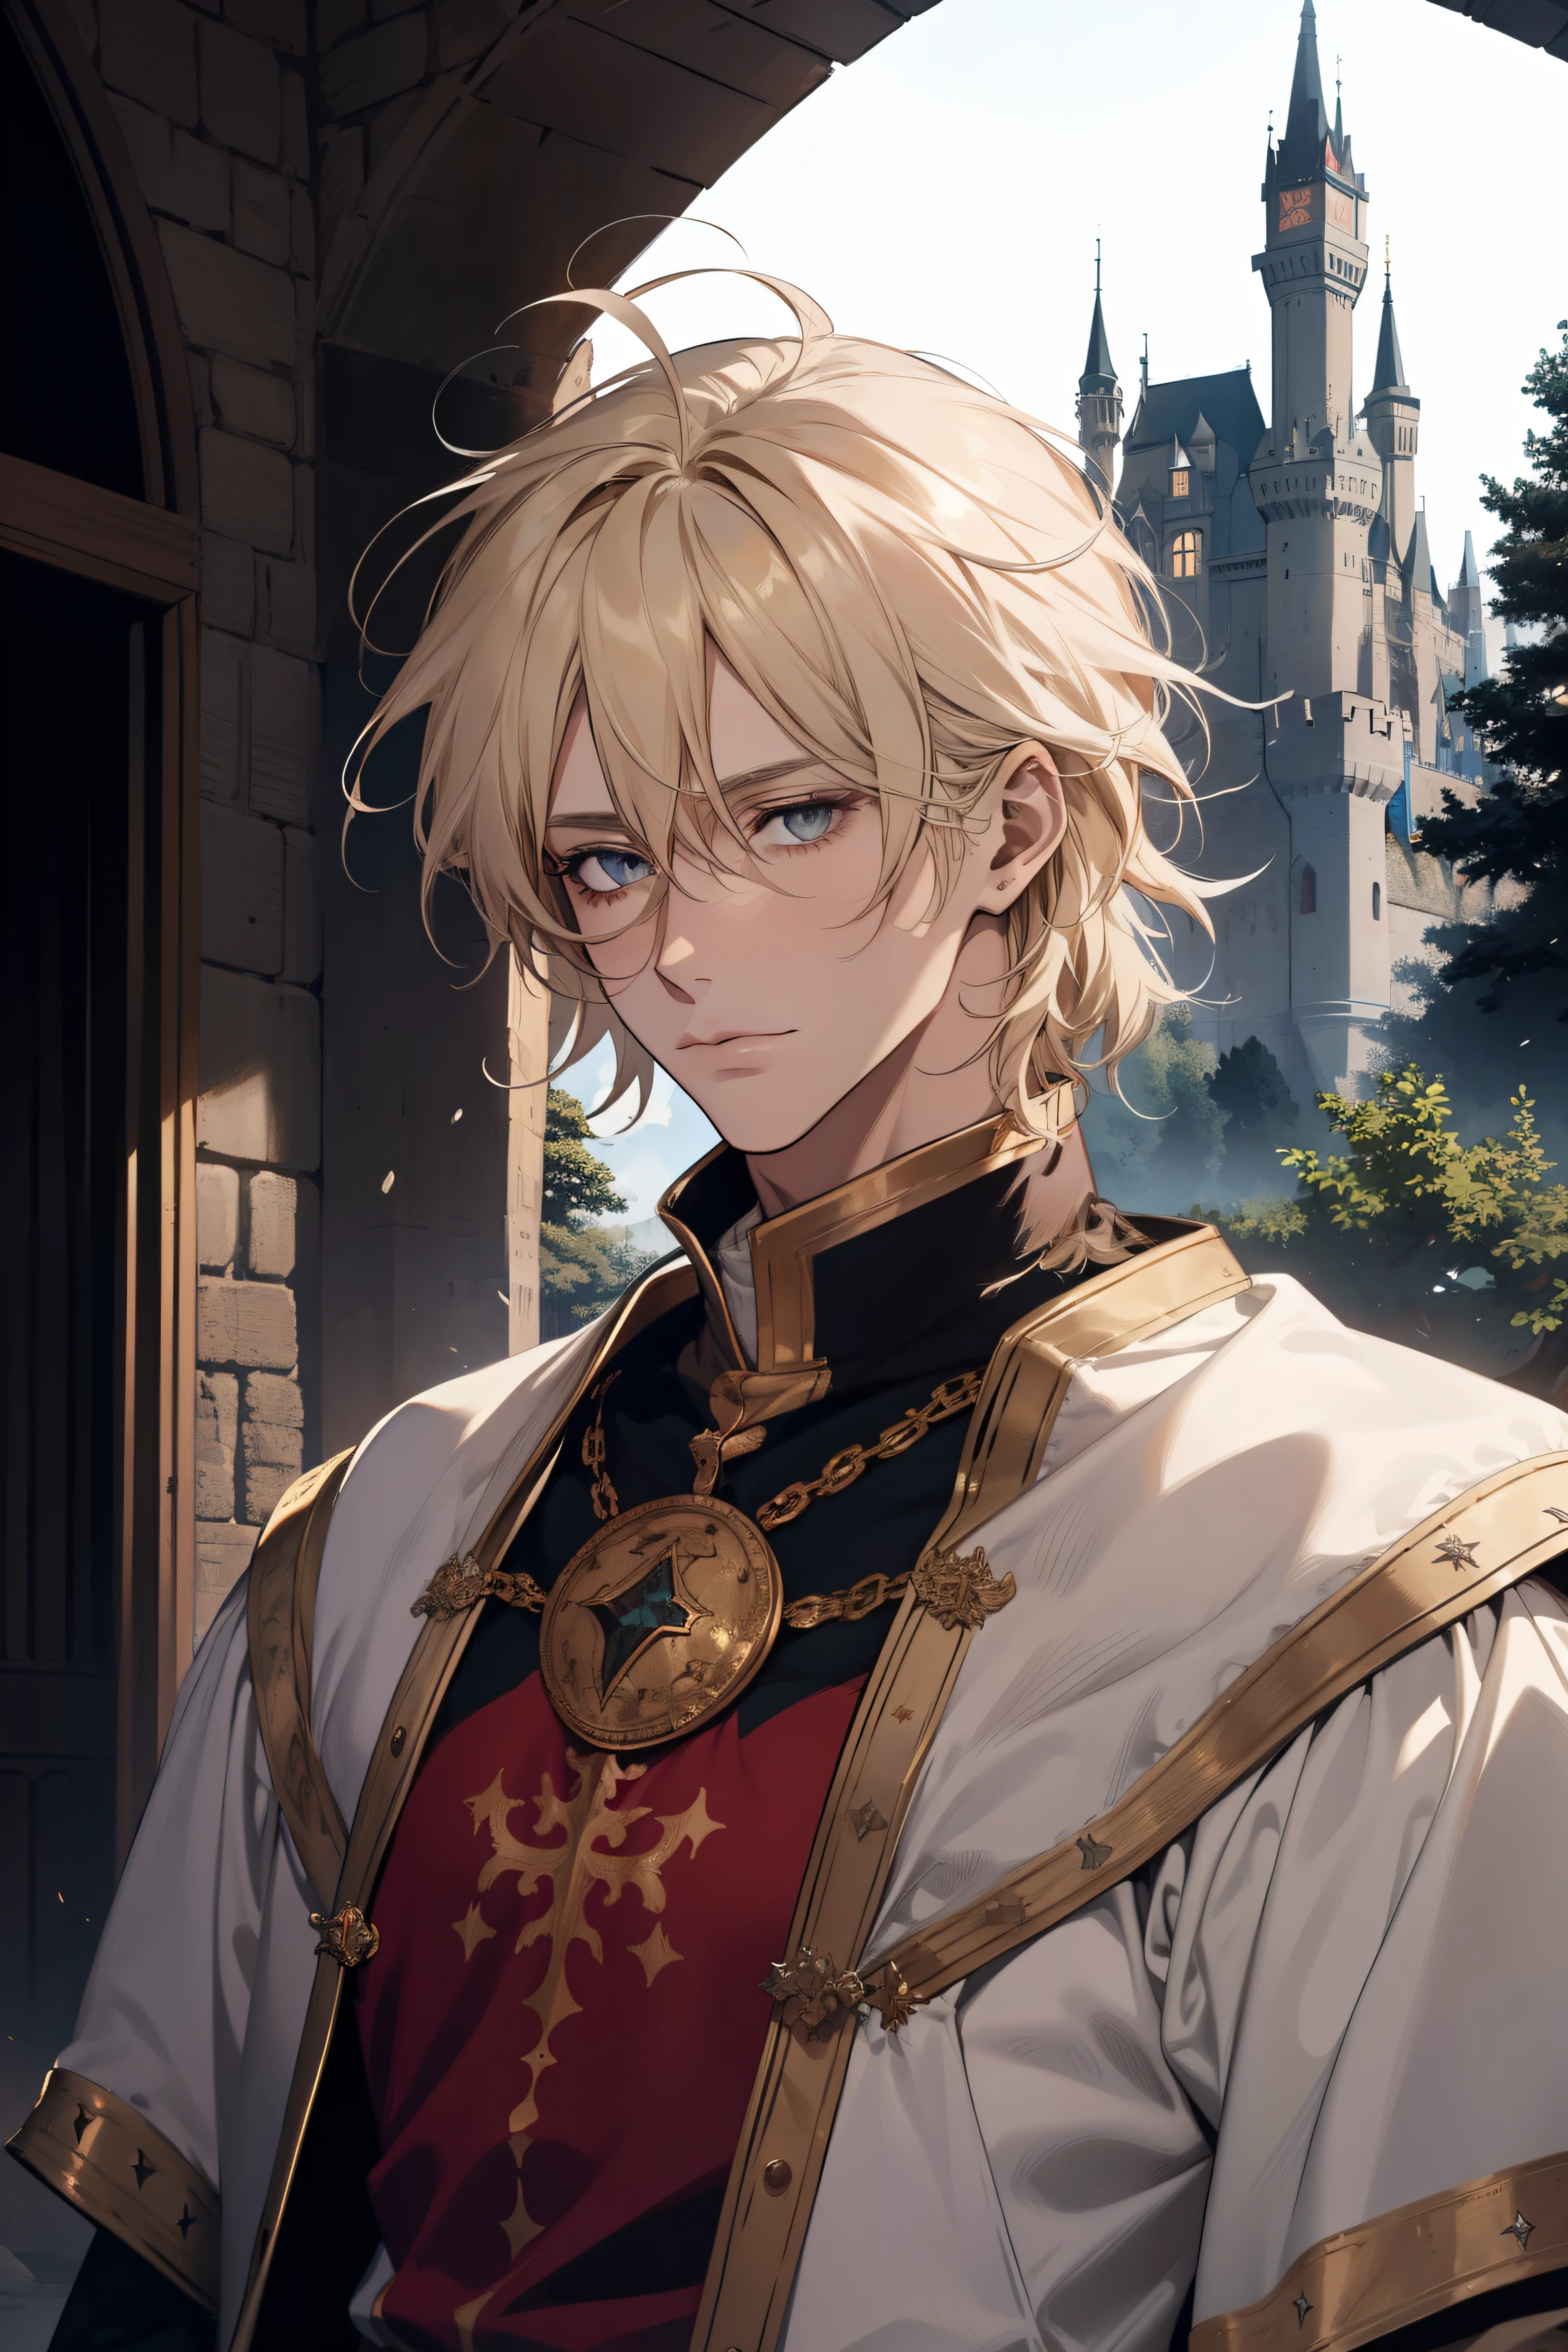 1male people, AS-Adult, Messy blonde hair and bangs, prinz, white  clothes, Handsome, dispassionate, The beautiful, Condescending, slimification, in a castle, Medieval fantasy